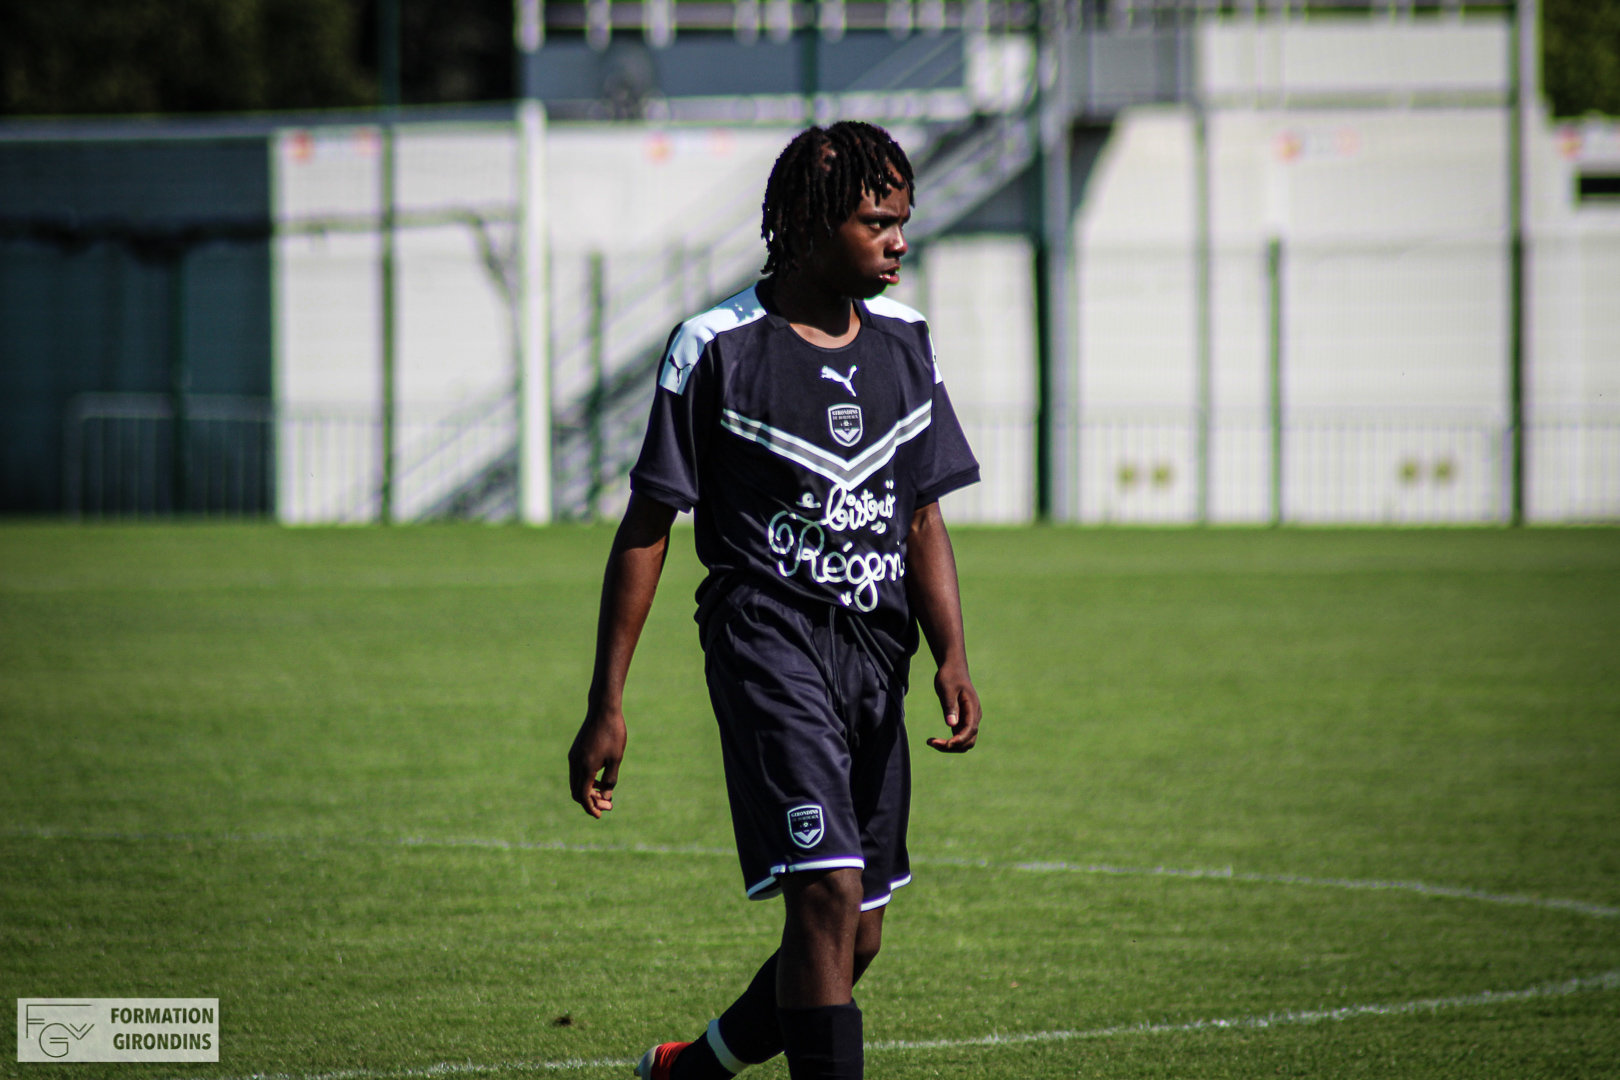 Cfa Girondins : Un match nul pour commencer - Formation Girondins 